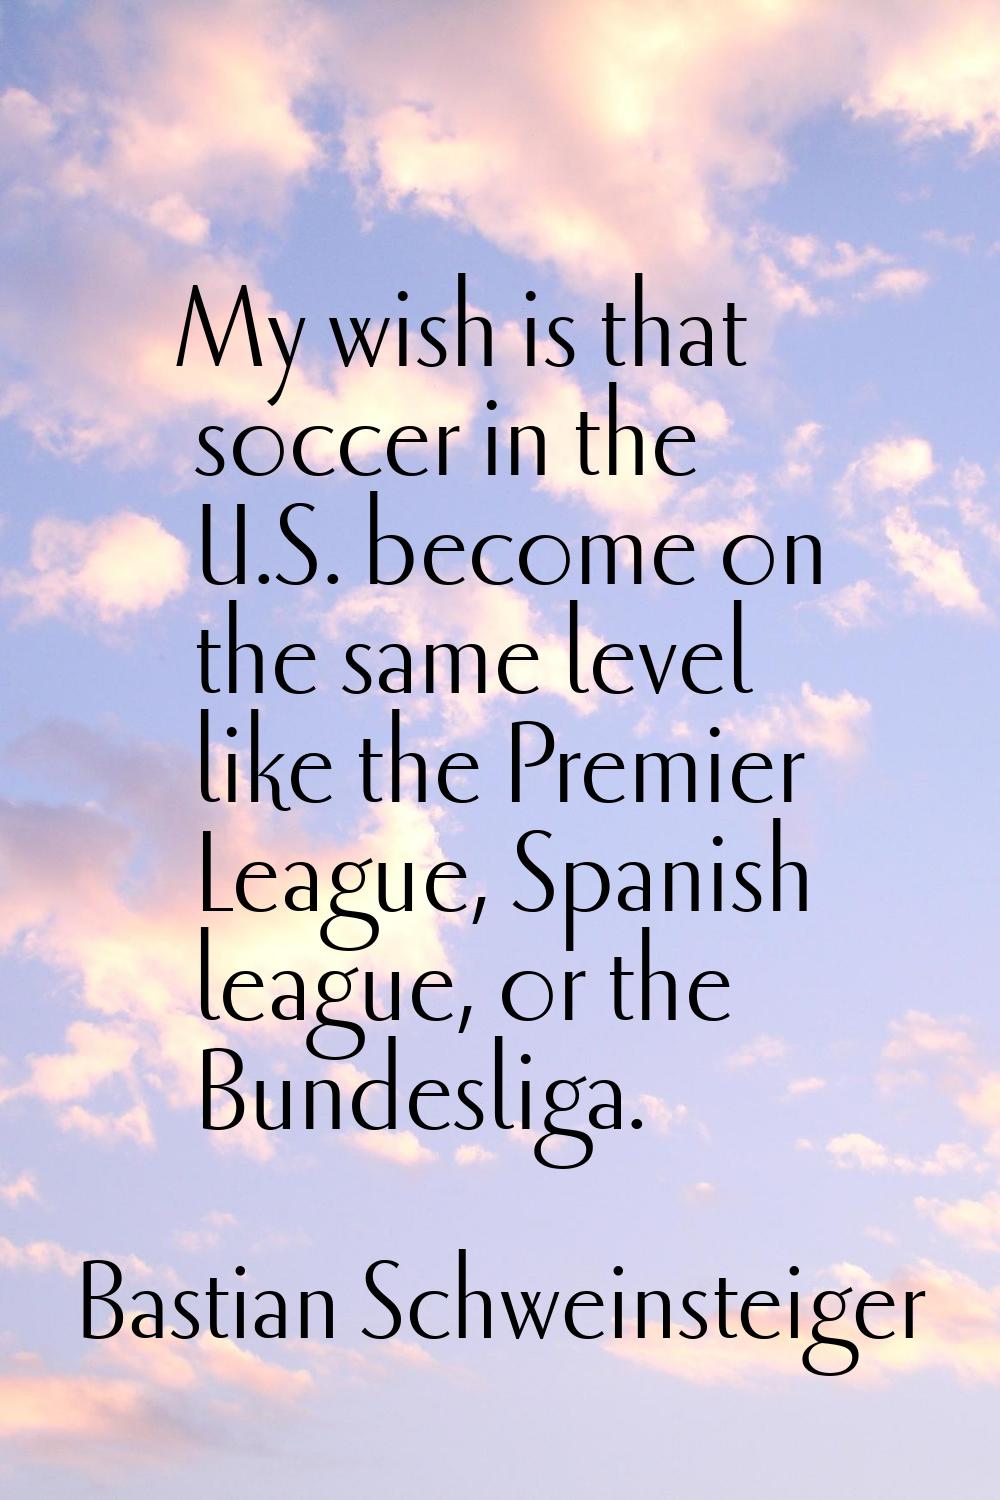 My wish is that soccer in the U.S. become on the same level like the Premier League, Spanish league